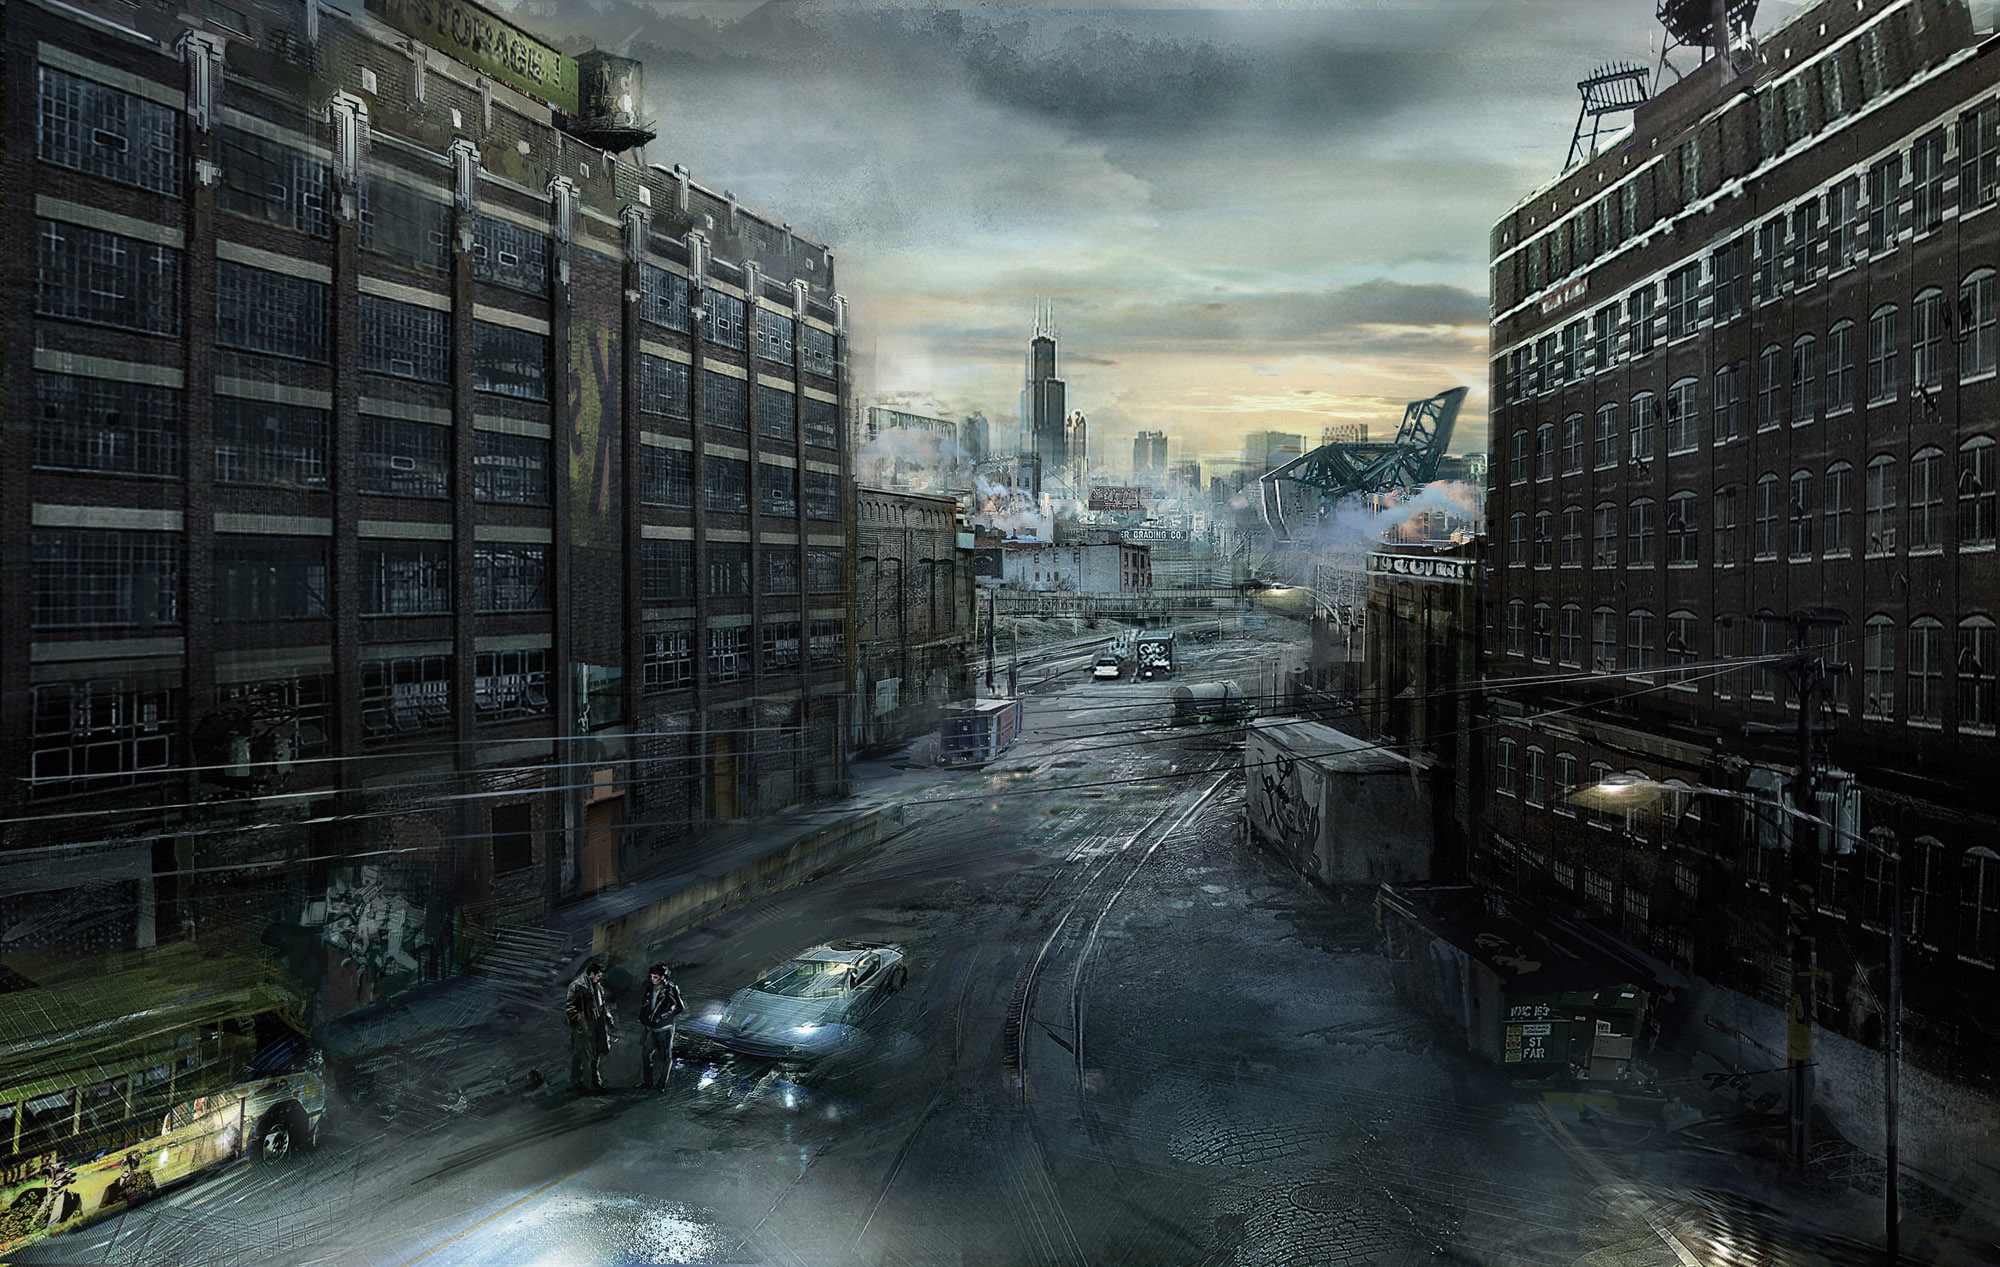 Fine Art: The Art (Well, Some Of The Art) From Watch Dogs